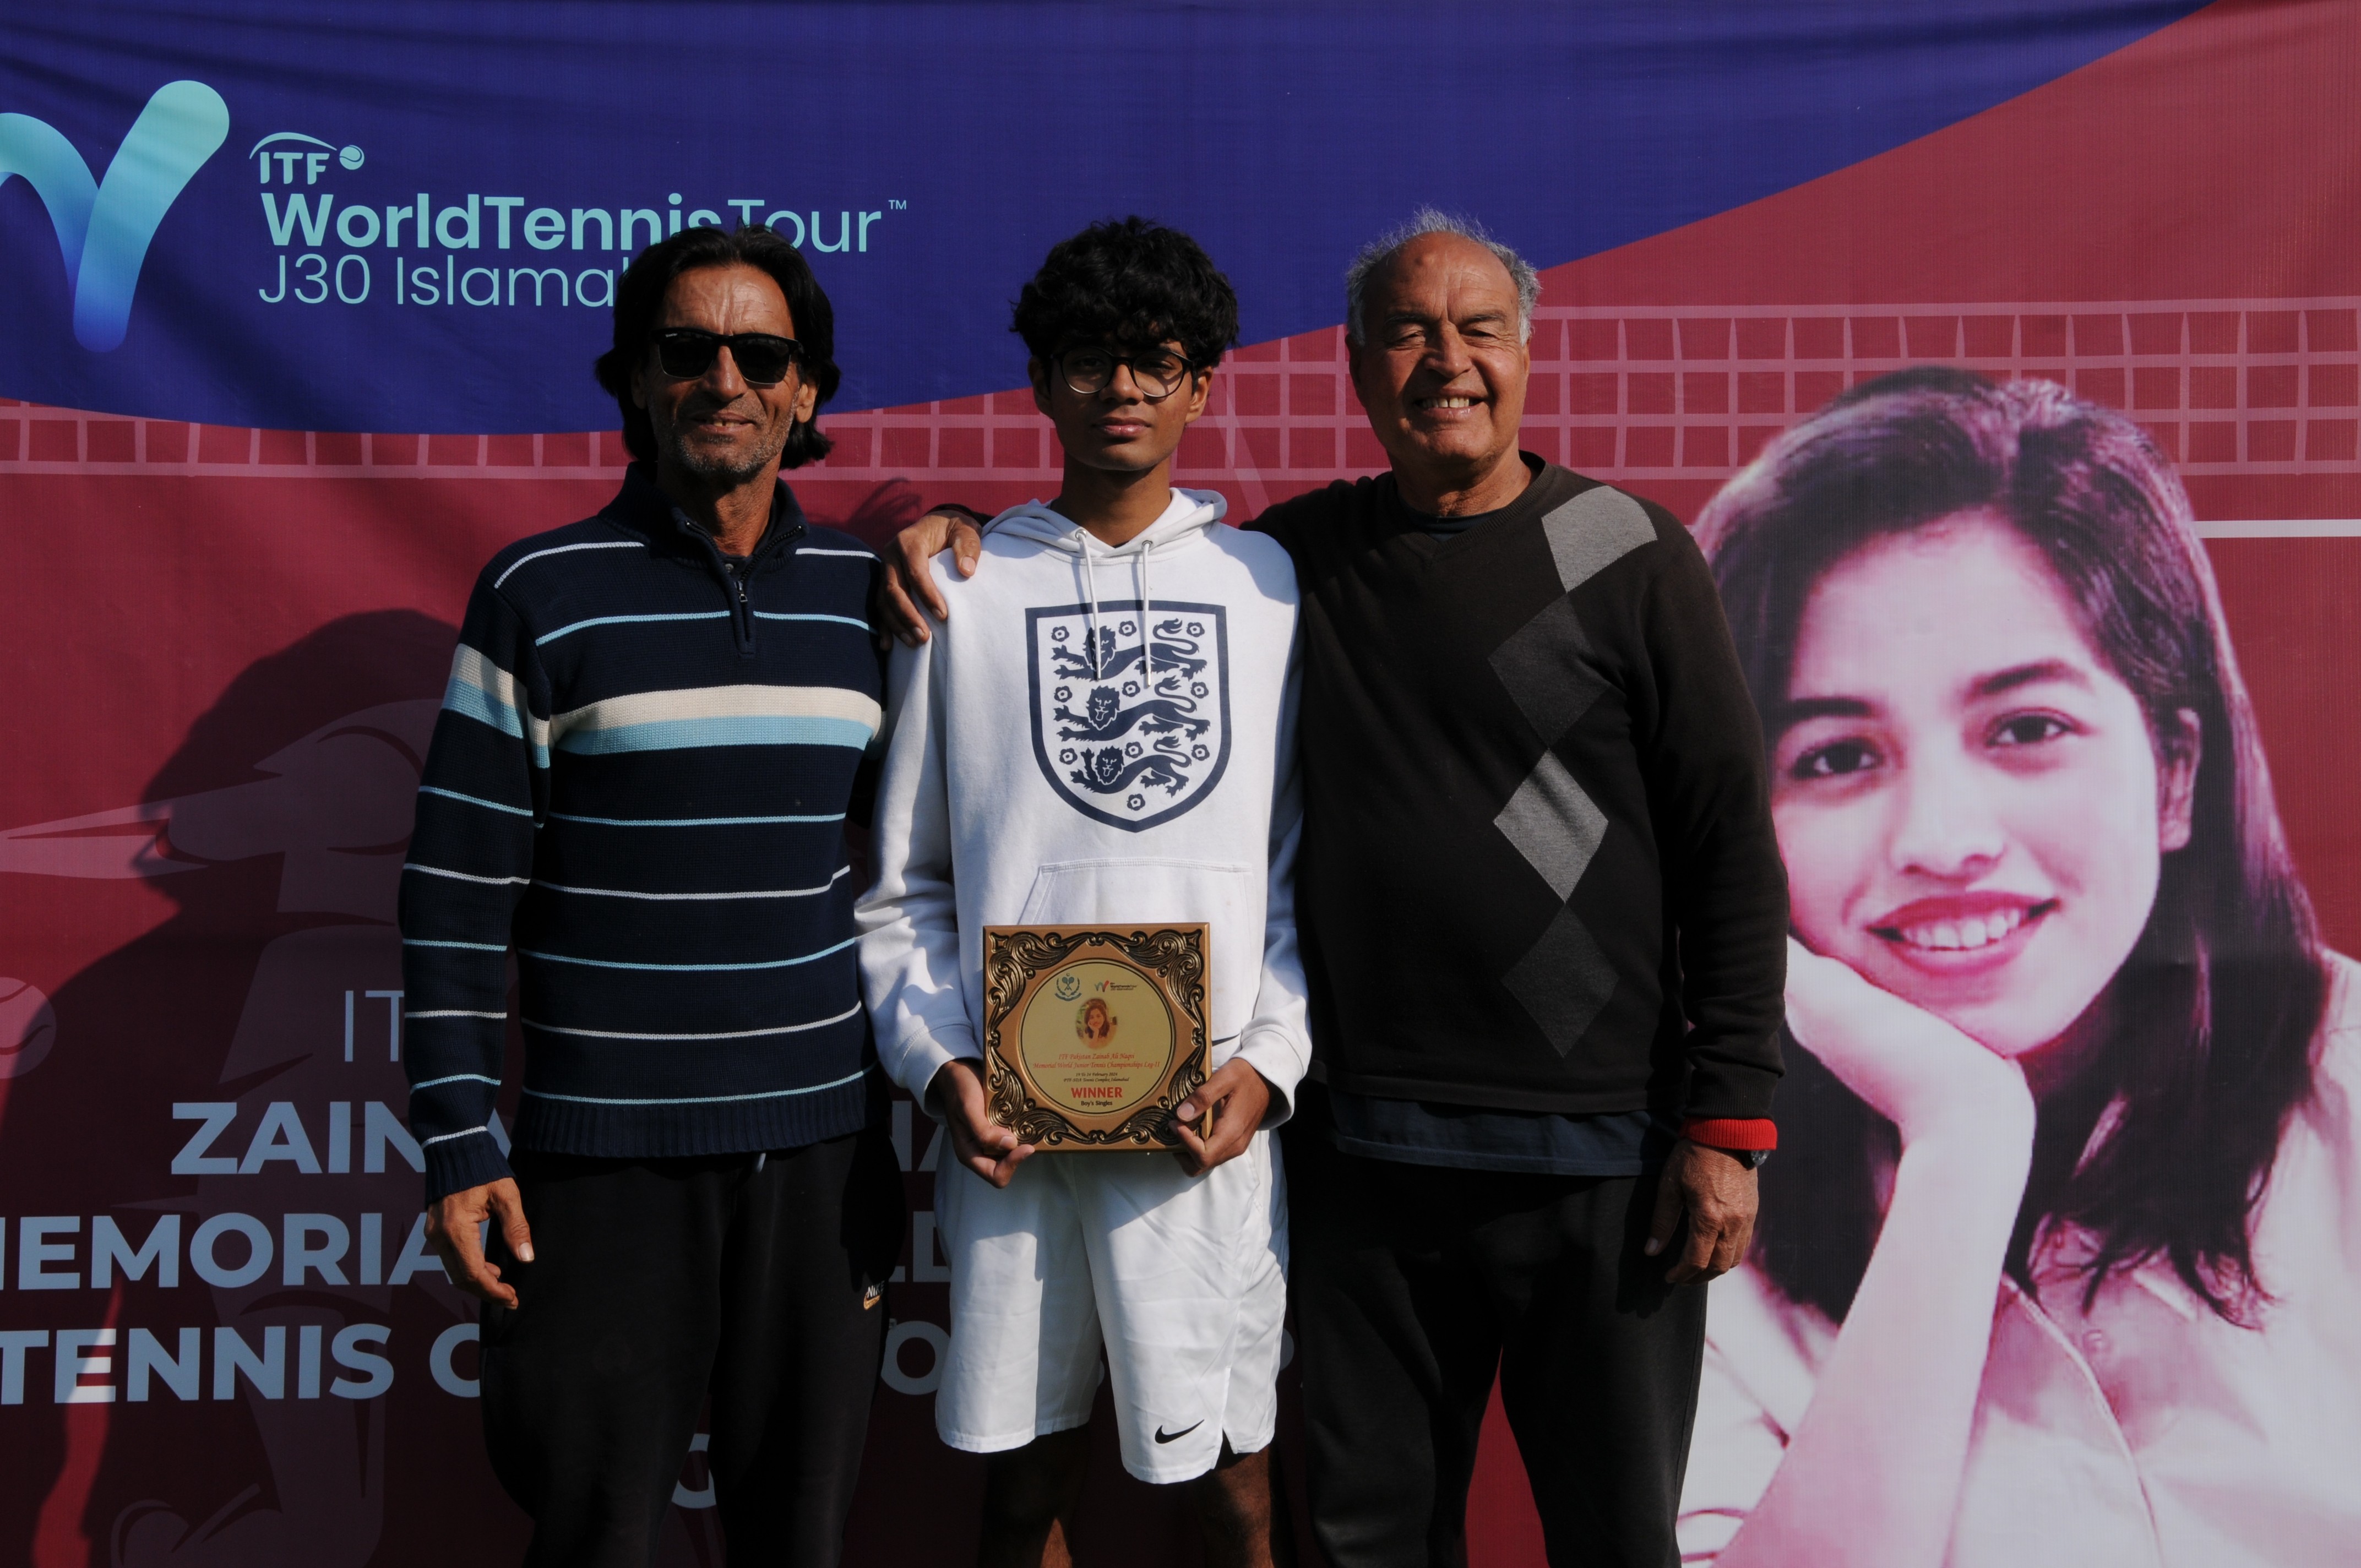 A group photo of tennis player with coaches after winning